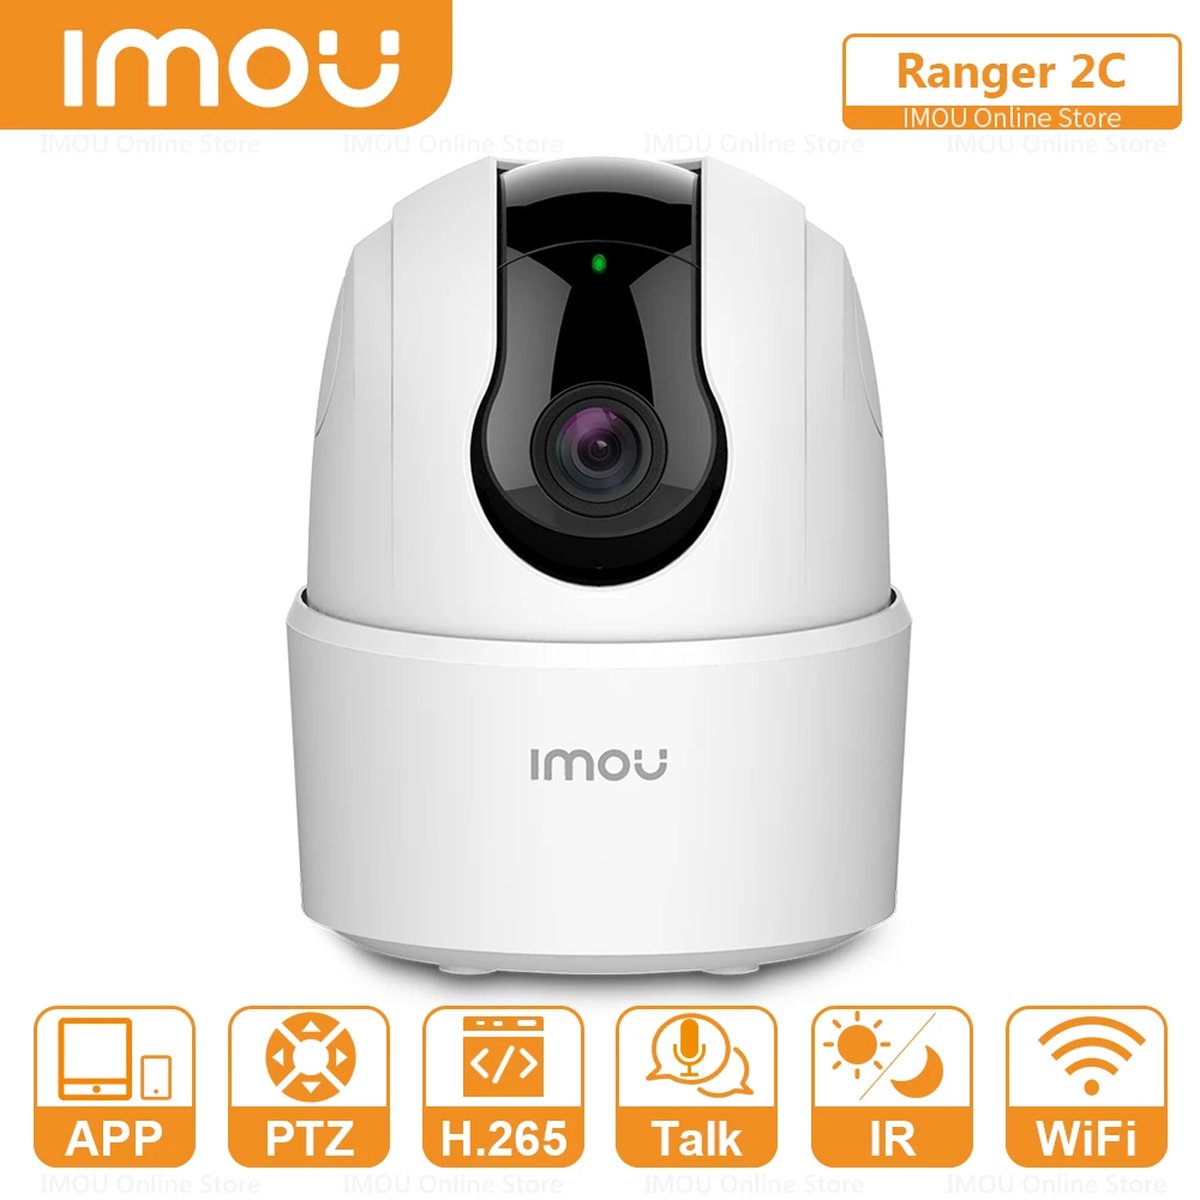 Imou Ranger 2C 1080P Security camera Human Detection Night Vision Home Security beveiliging Draadloos Wi-Fi